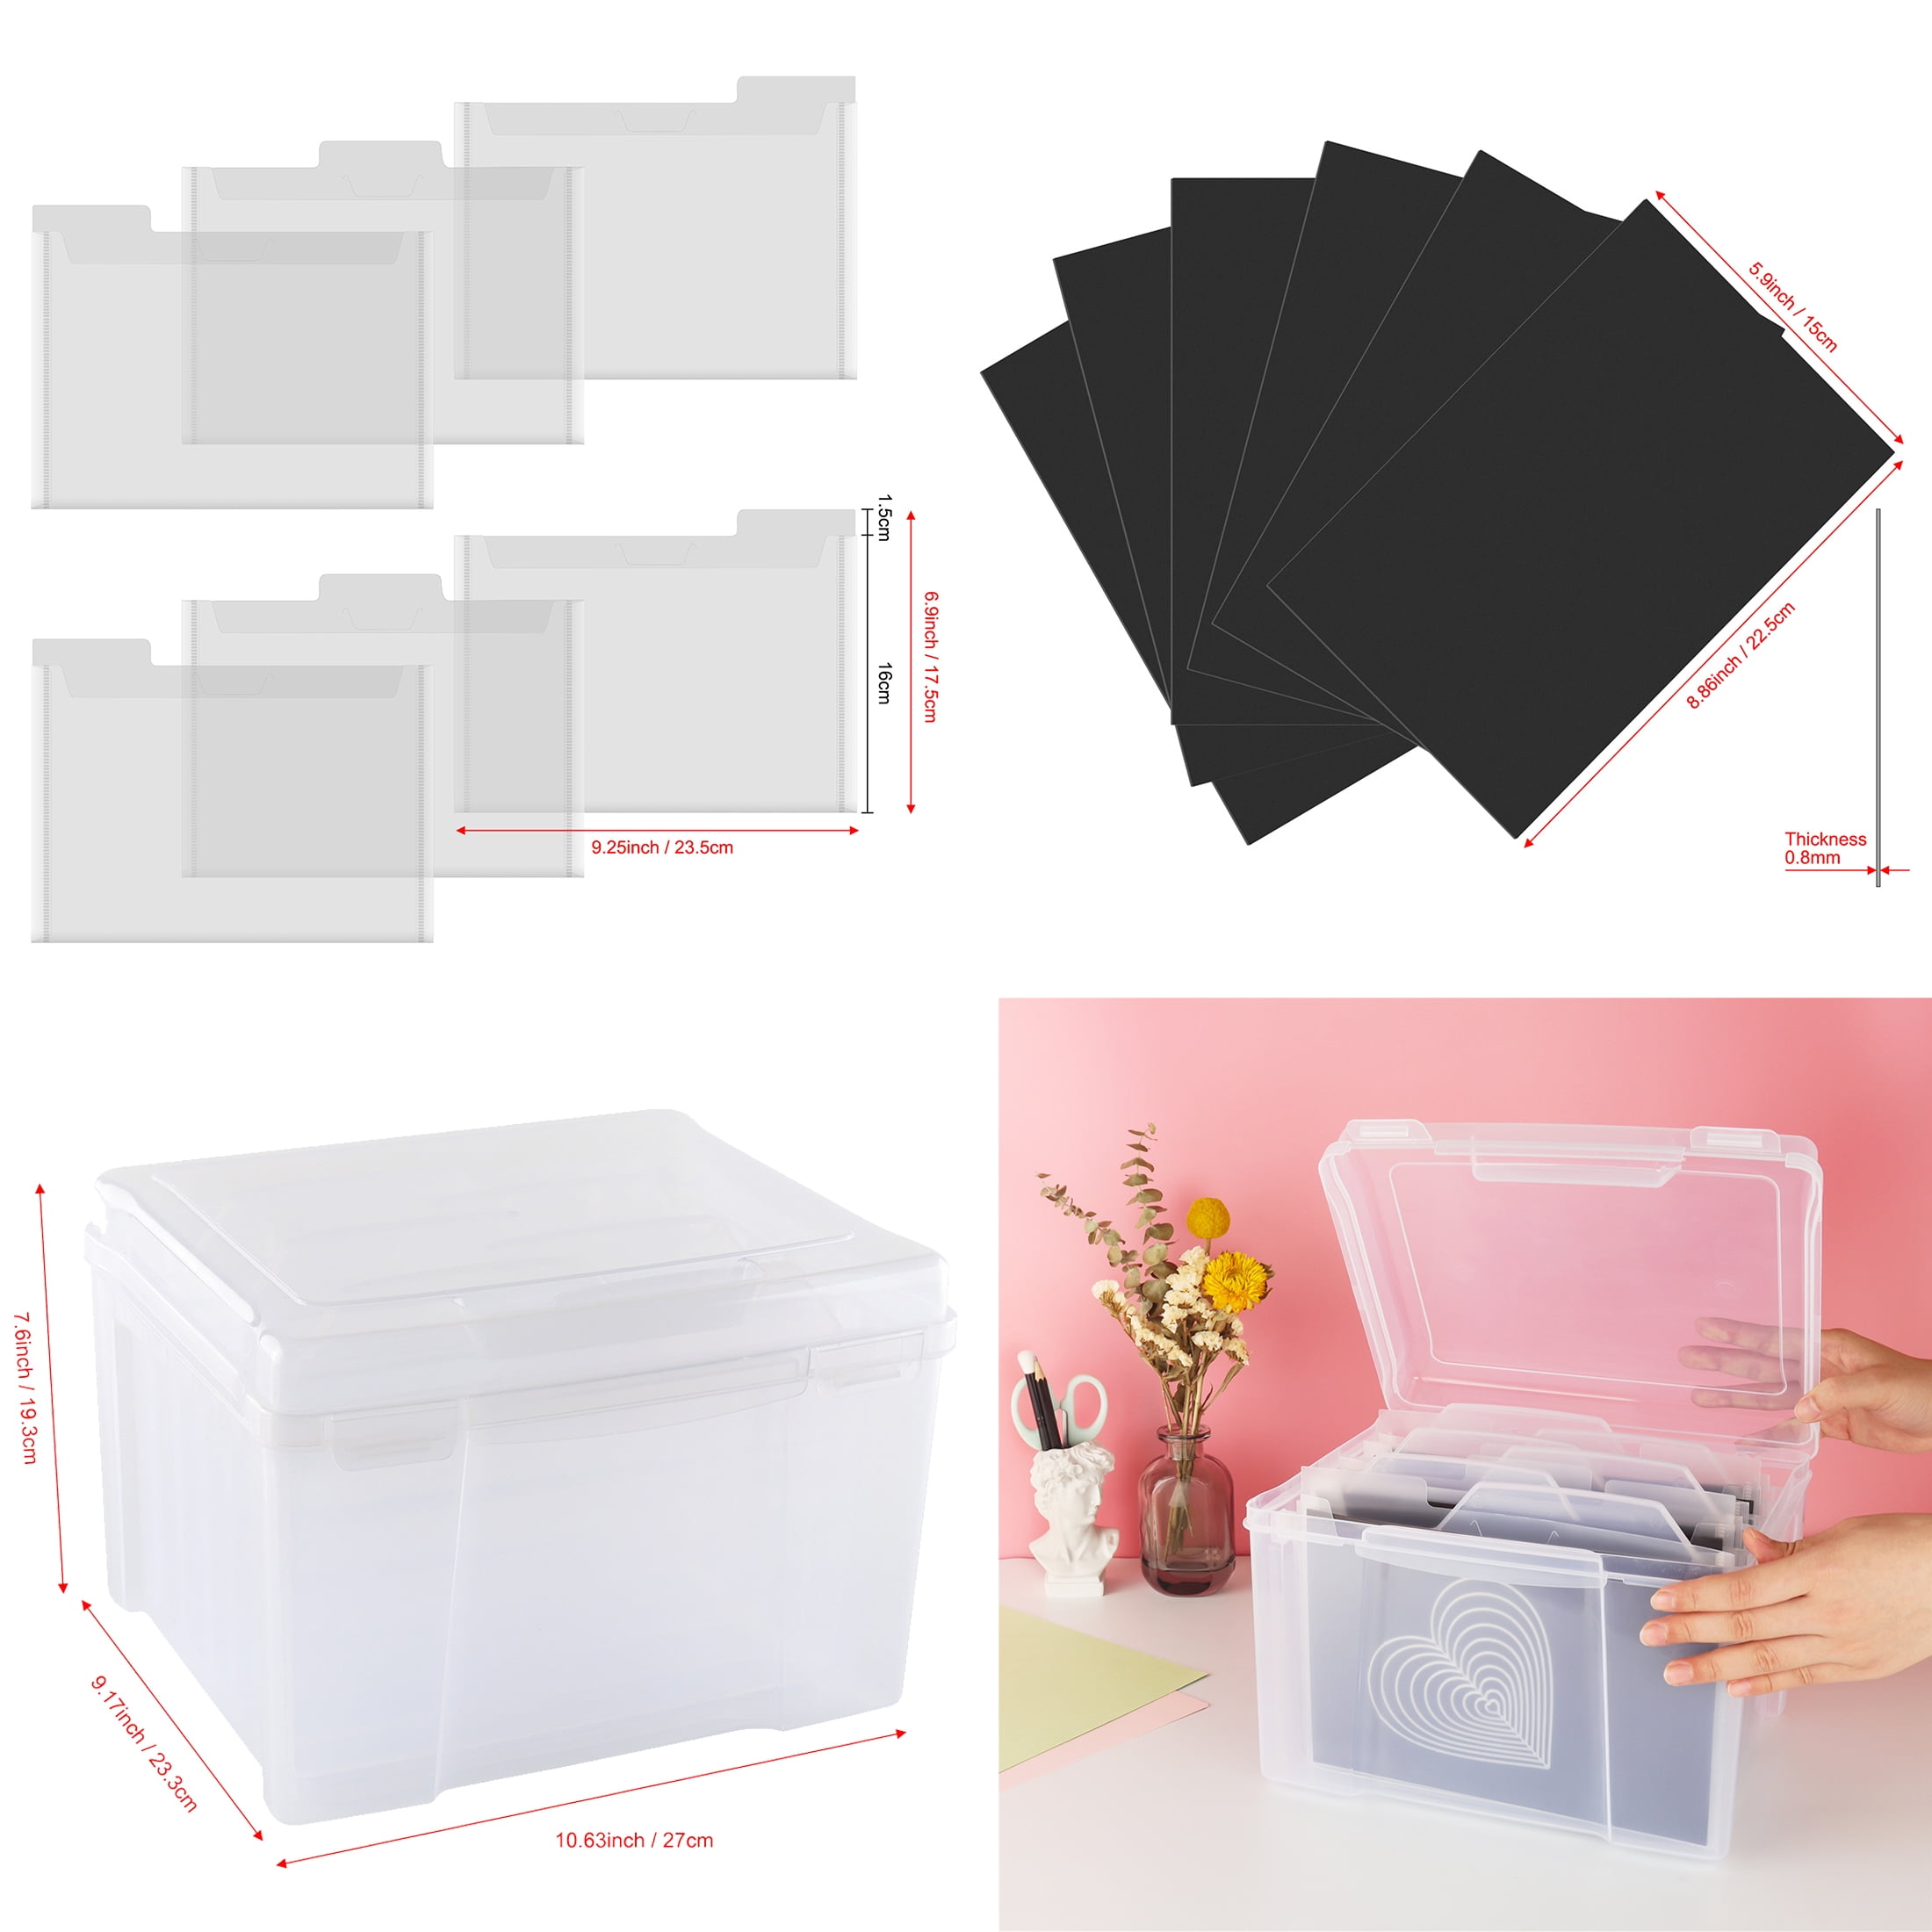 Clear Craft Storage Box with 6 Tabbed Dividers for Holiday Birthday Photos,  Crafts, Scrapbook, Paper, Stickers, Envelopes and More, Plastic Box of